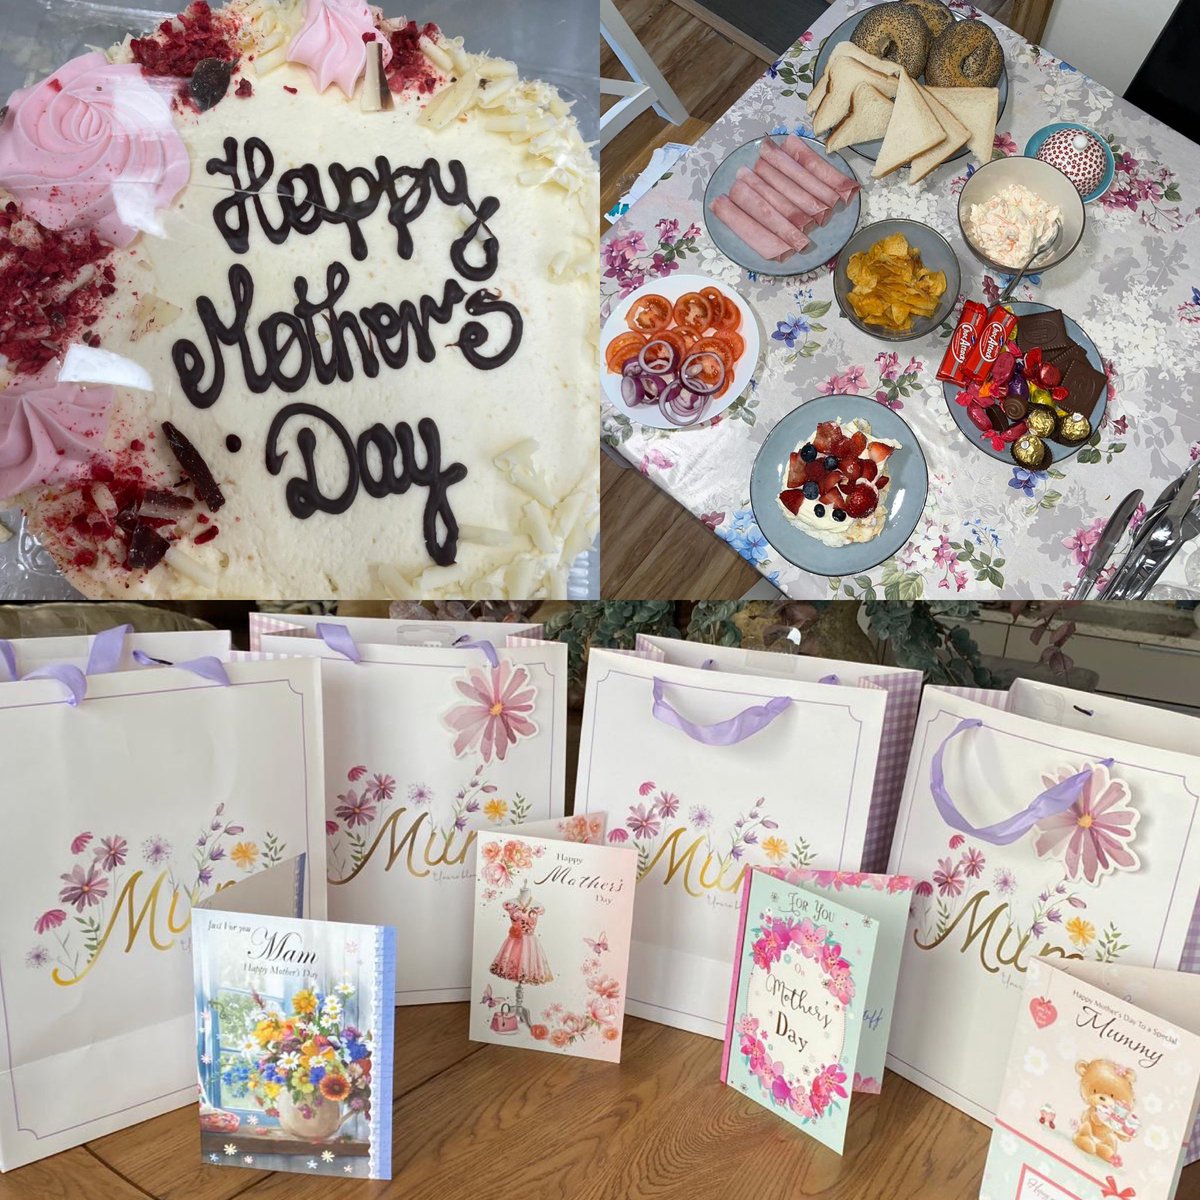 Happy Mother’s Day ❤️ The new mams at Cherry Blossom Cottage celebrated their first Mother’s Day with a gorgeous lunch and presents. Thank you to @thbdublin @lionsclubsIrl in Swords and Malahide and Bronagh for the donations to make this Mother’s Day special for the mams at CBC.